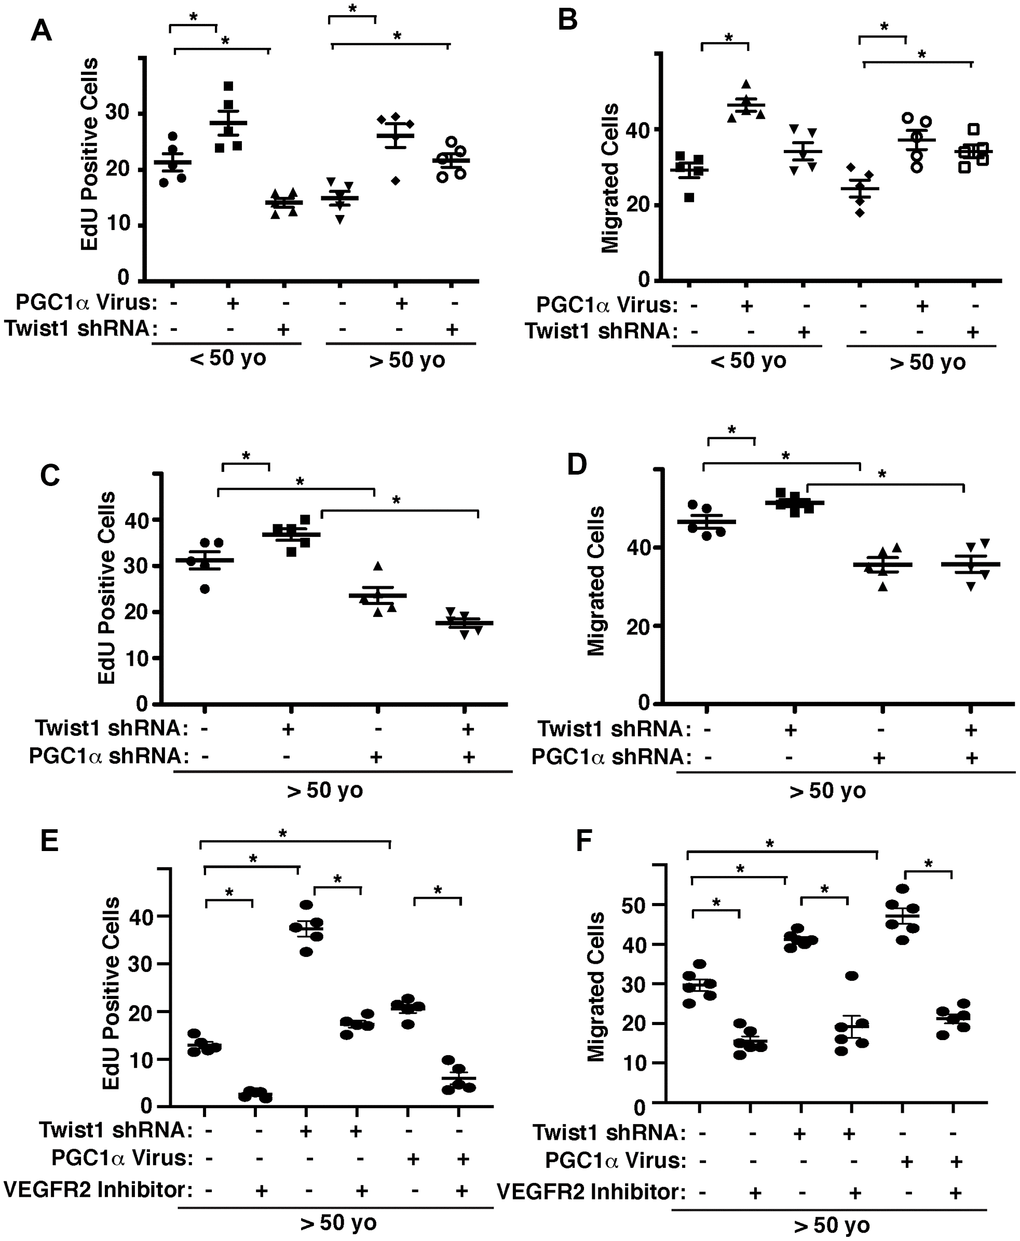 Twist1-PGC1α signaling controls EC DNA synthesis and migration in young vs. aged ECs. (A) Graph showing EdU-positive young (50 years old) human adipose ECs treated with lentivirus overexpressing PGC1α or Twist1 shRNA (n=5, mean ± s.e.m., *, pB) Graph showing young vs. aged human adipose ECs treated with lentivirus overexpressing PGC1α or Twist1 shRNA migrating towards 5% FBS (n=5, mean±s.e.m., *, pC) Graph showing EdU-positive aged human adipose ECs treated with lentivirus encoding Twist1 shRNA, PGC1α shRNA, or in combination (n=5, mean ± s.e.m., *, pD) Graph showing aged human adipose ECs treated with lentivirus encoding Twist1 shRNA, PGC1α shRNA, or in combination migrating towards 5% FBS (n=5, mean ± s.e.m., *, pE) Graph showing EdU-positive aged human adipose ECs treated with lentivirus encoding Twist1 shRNA, PGC1α, or in combination with VEGFR2 inhibitor SU5416 (n=5, mean ± s.e.m., *, pF) Graph showing aged human adipose ECs treated with lentivirus encoding Twist1 shRNA, PGC1α, or in combination with VEGFR2 inhibitor SU5416 migrating towards 5% FBS (n=6, mean ± s.e.m., *, p